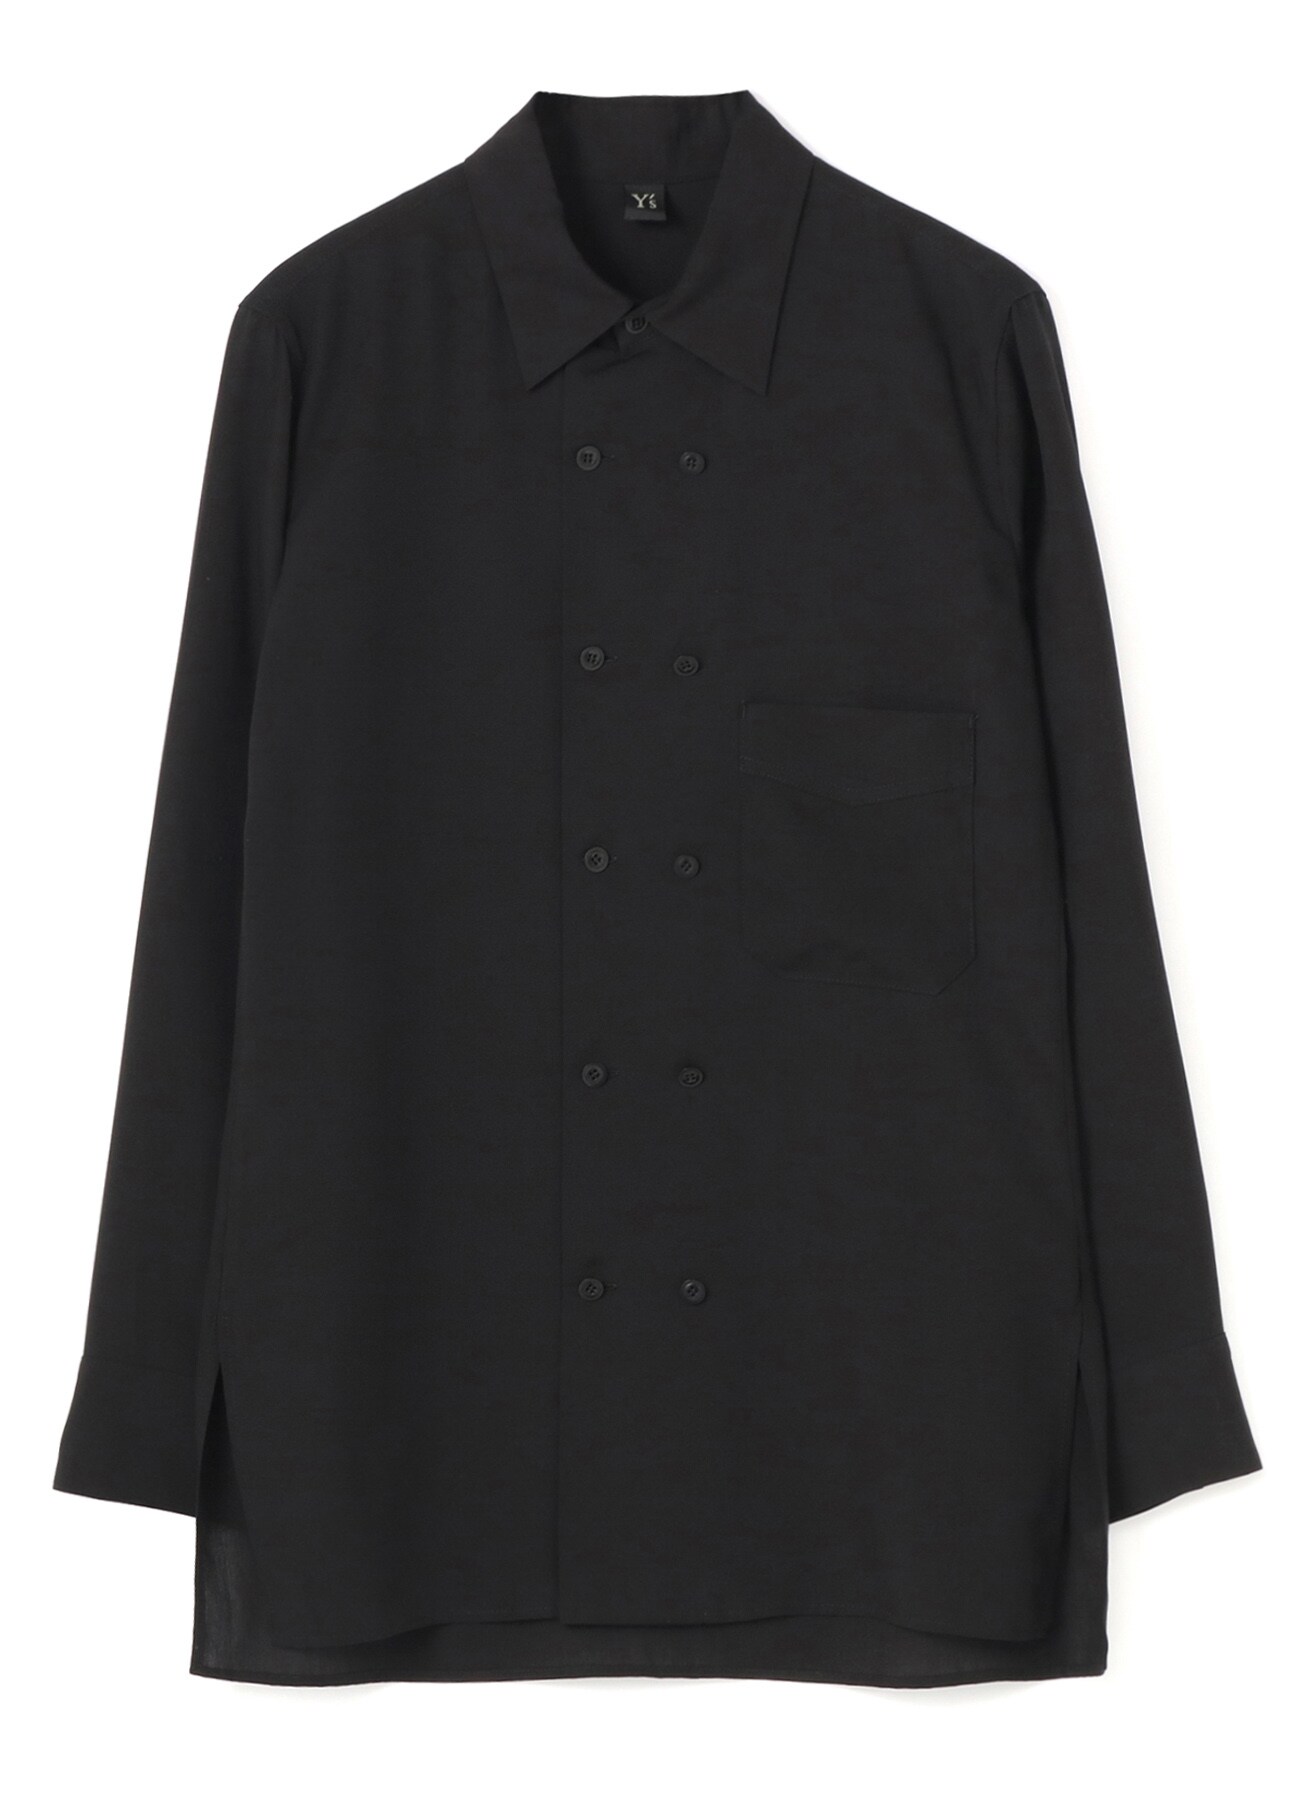 CELLULOSE POPLIN FRONT DOUBLE SHIRT